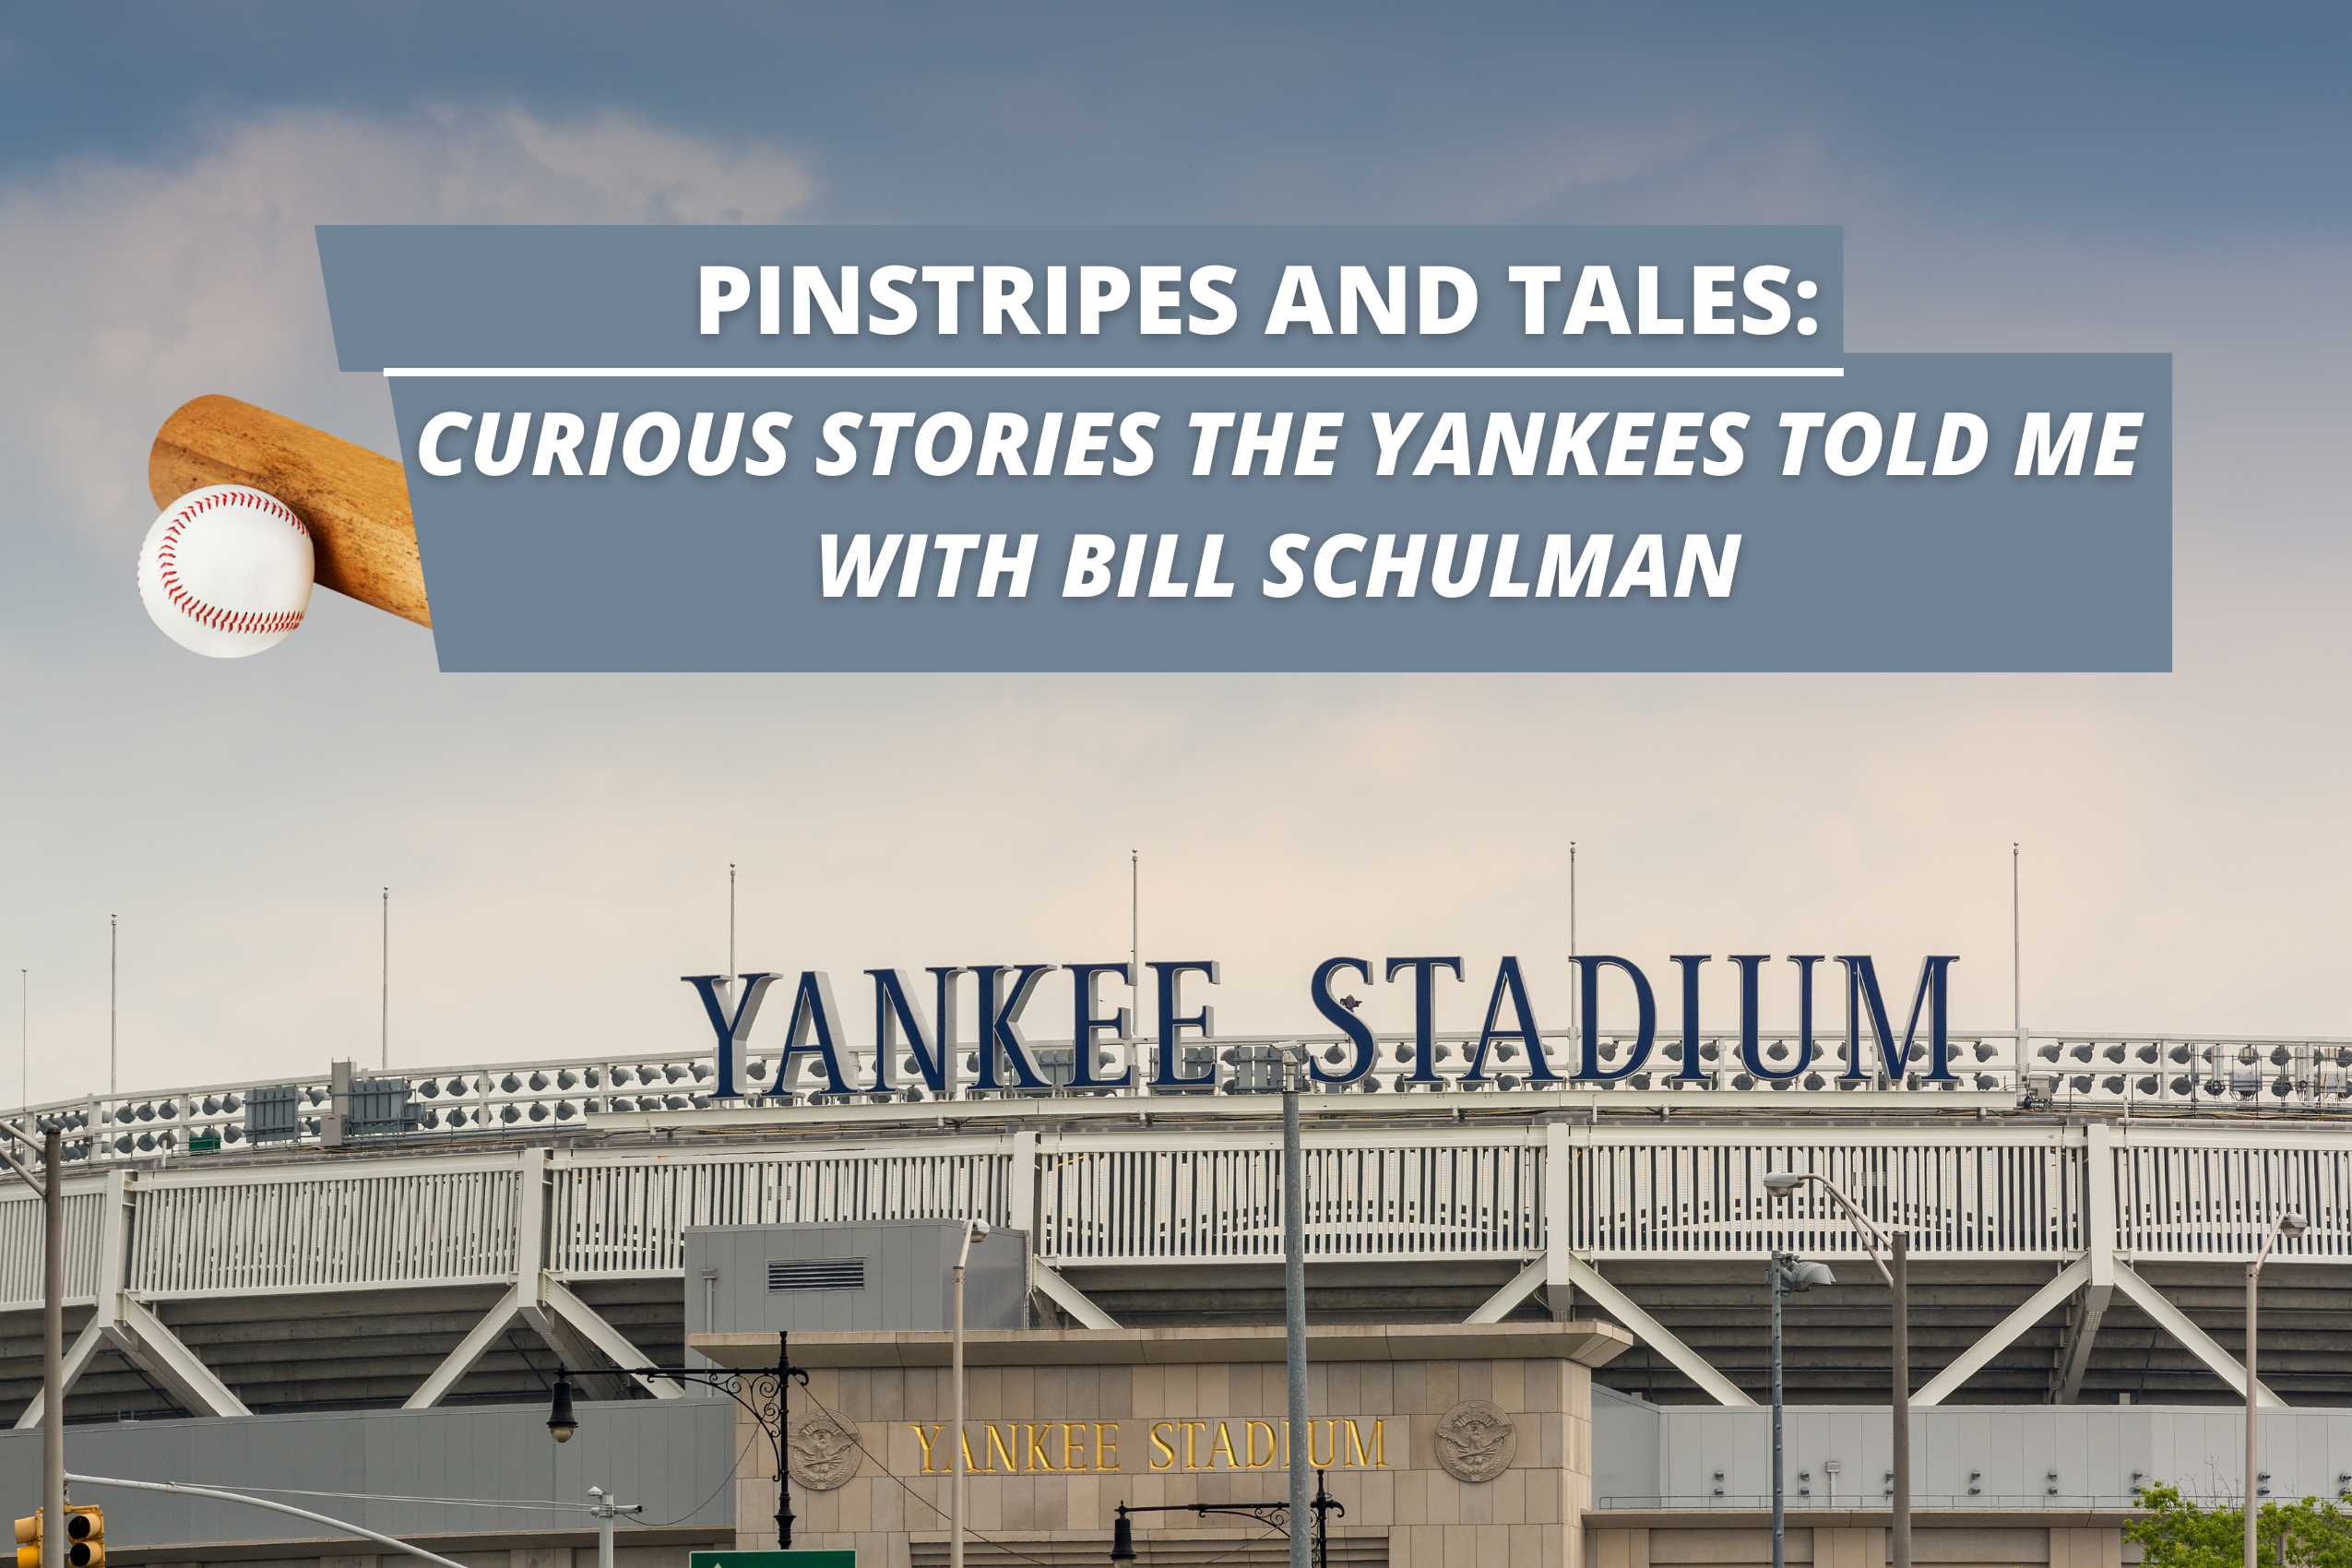 Yankee Stadium with Pinstripes and Tales: Curious Stories the Yankees Told me with Bill Schulman written above the stadium entrance